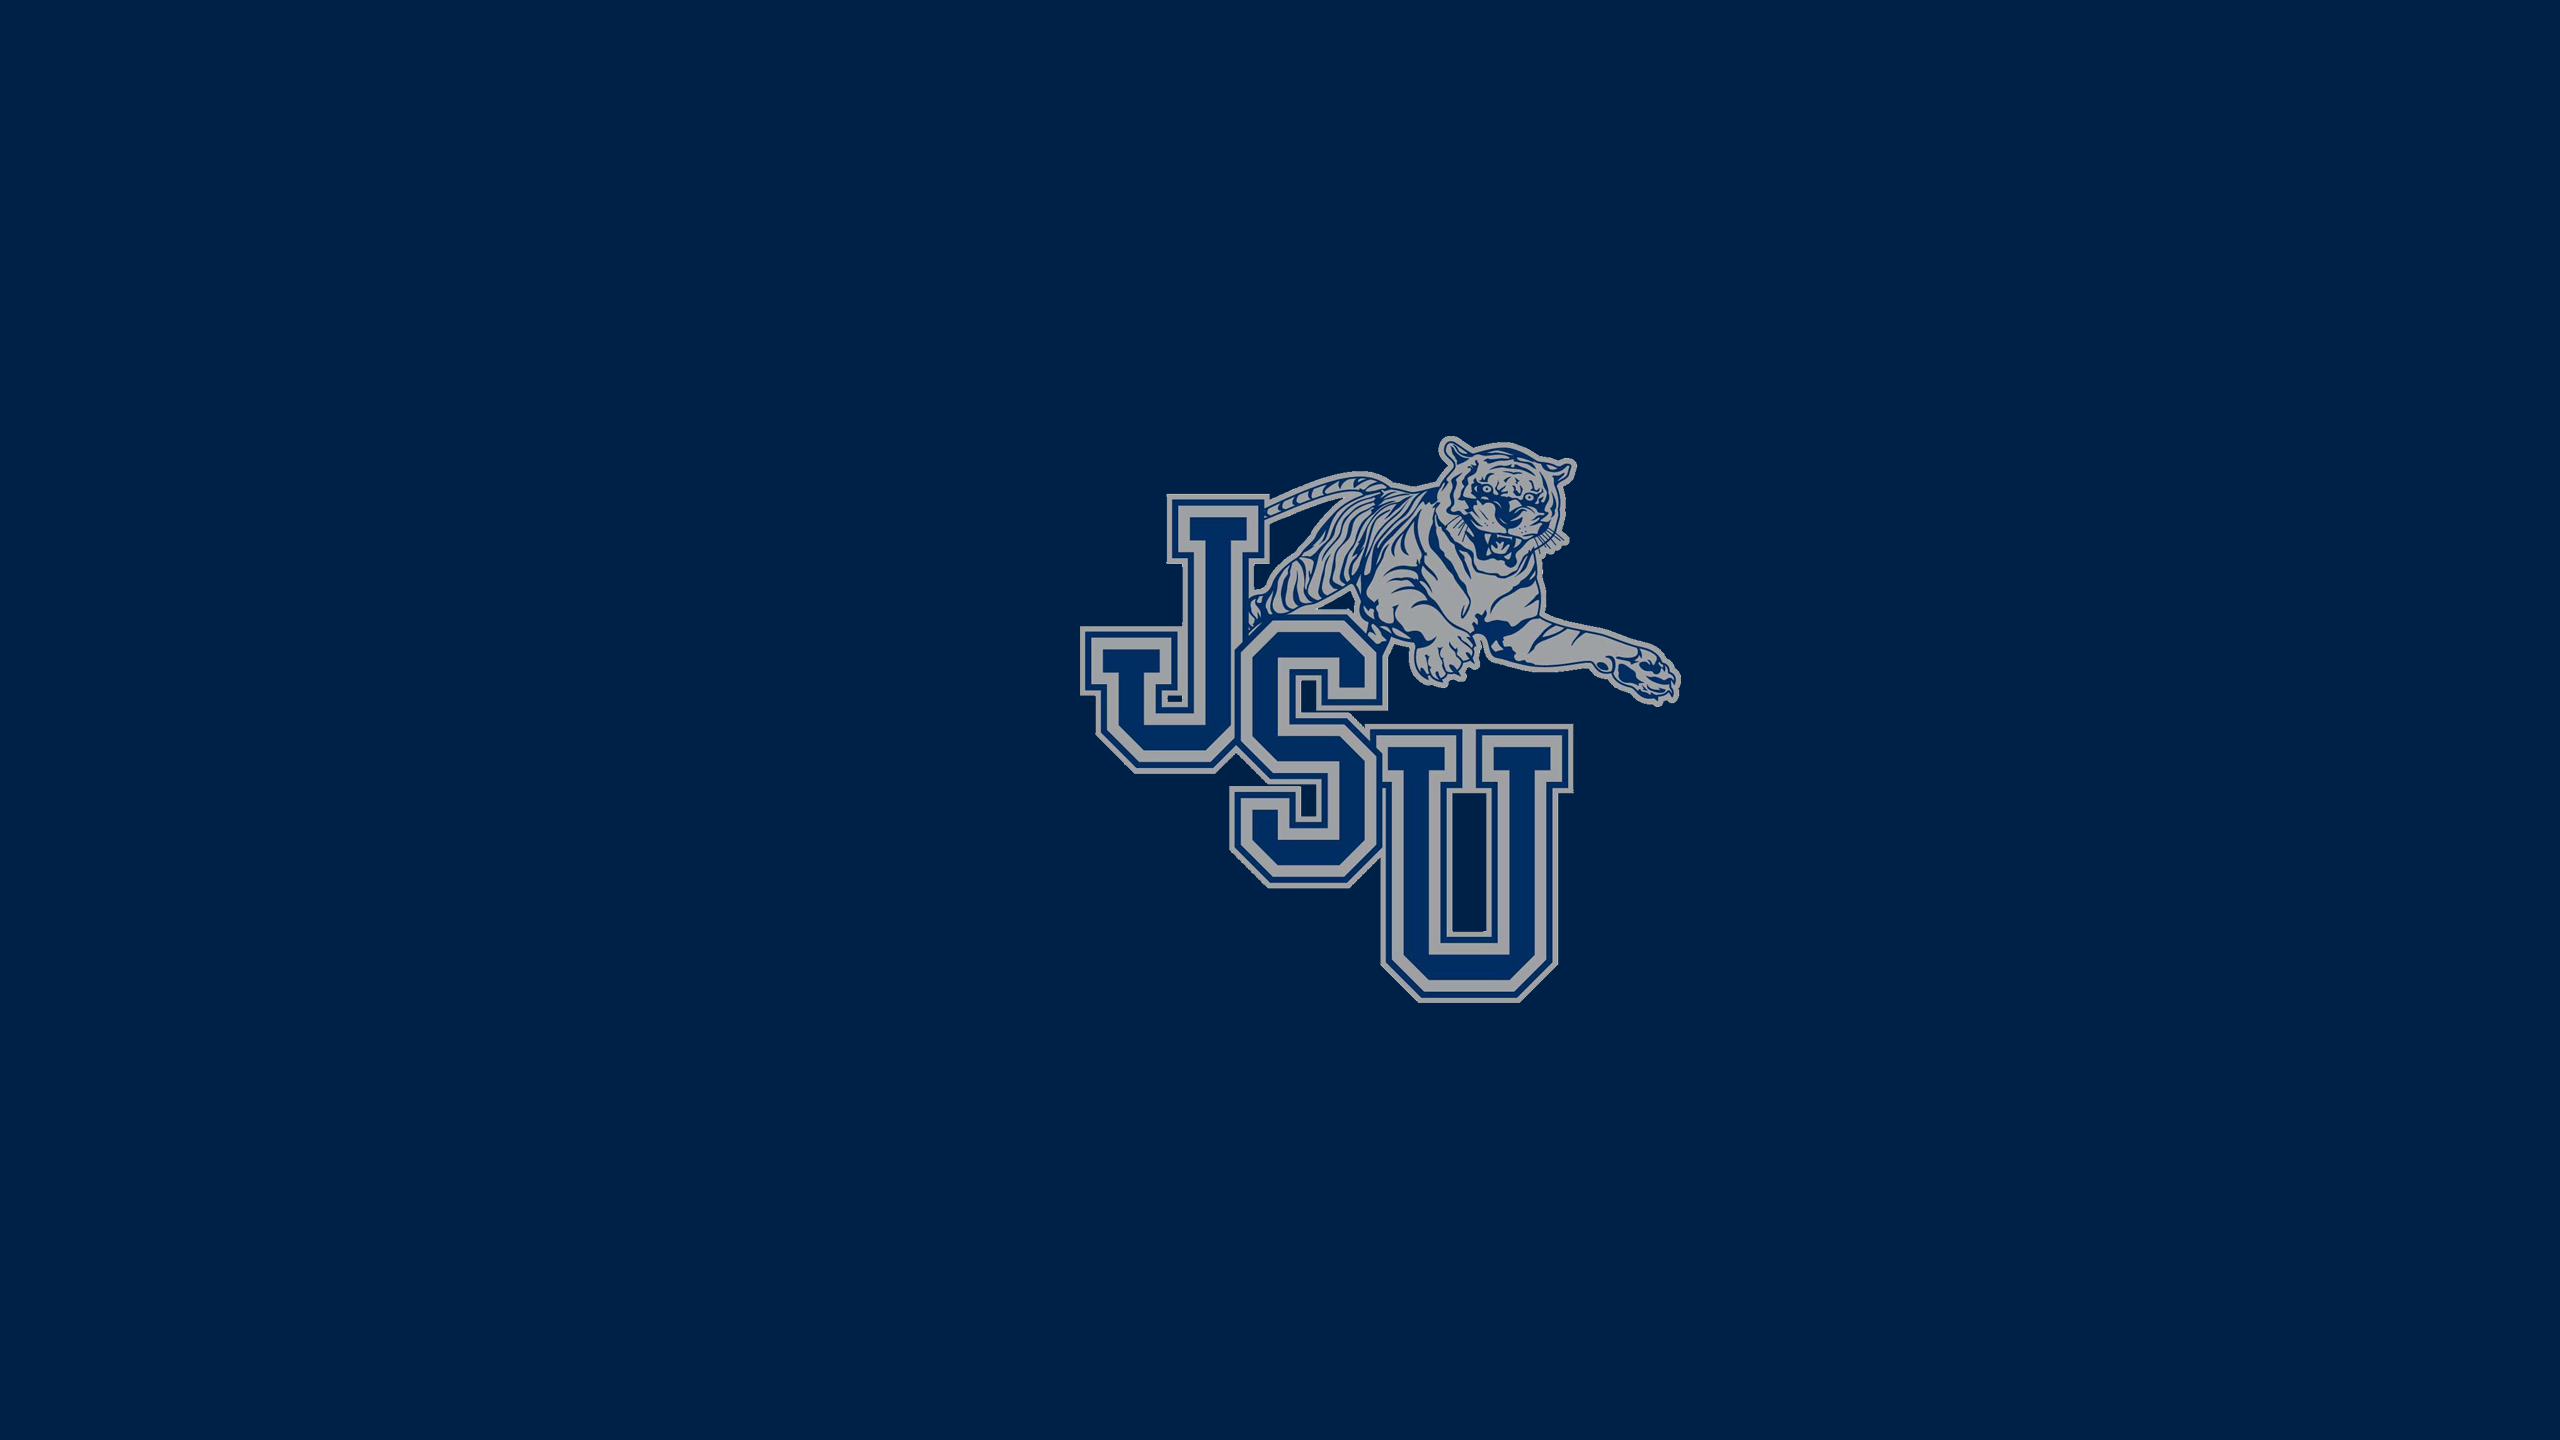 Jackson State Tigers Basketball - NCAAB - Square Bettor